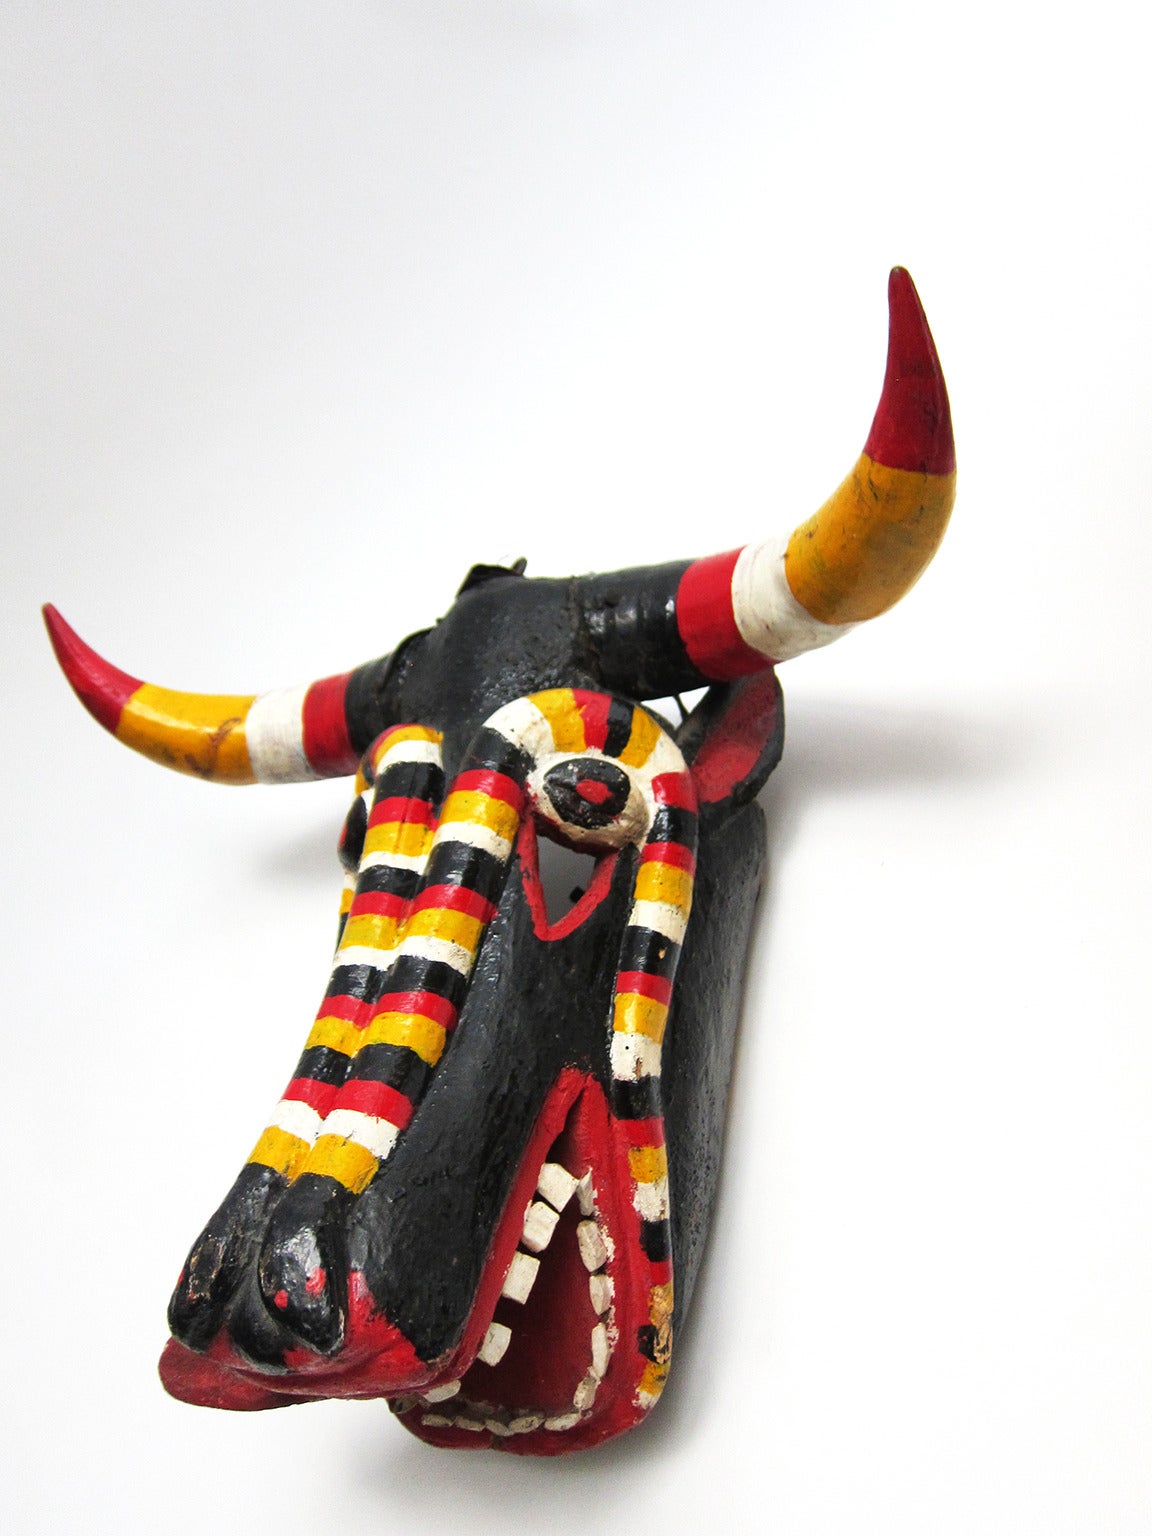 This mask is from Silao, Guanajuato from the Muyaes collection. It is hand carved polychromed wood with natural horns and is intended to depict the devil, with its horns and dominant red paint. Danced in the pastorela celebration (a Christmas drama)